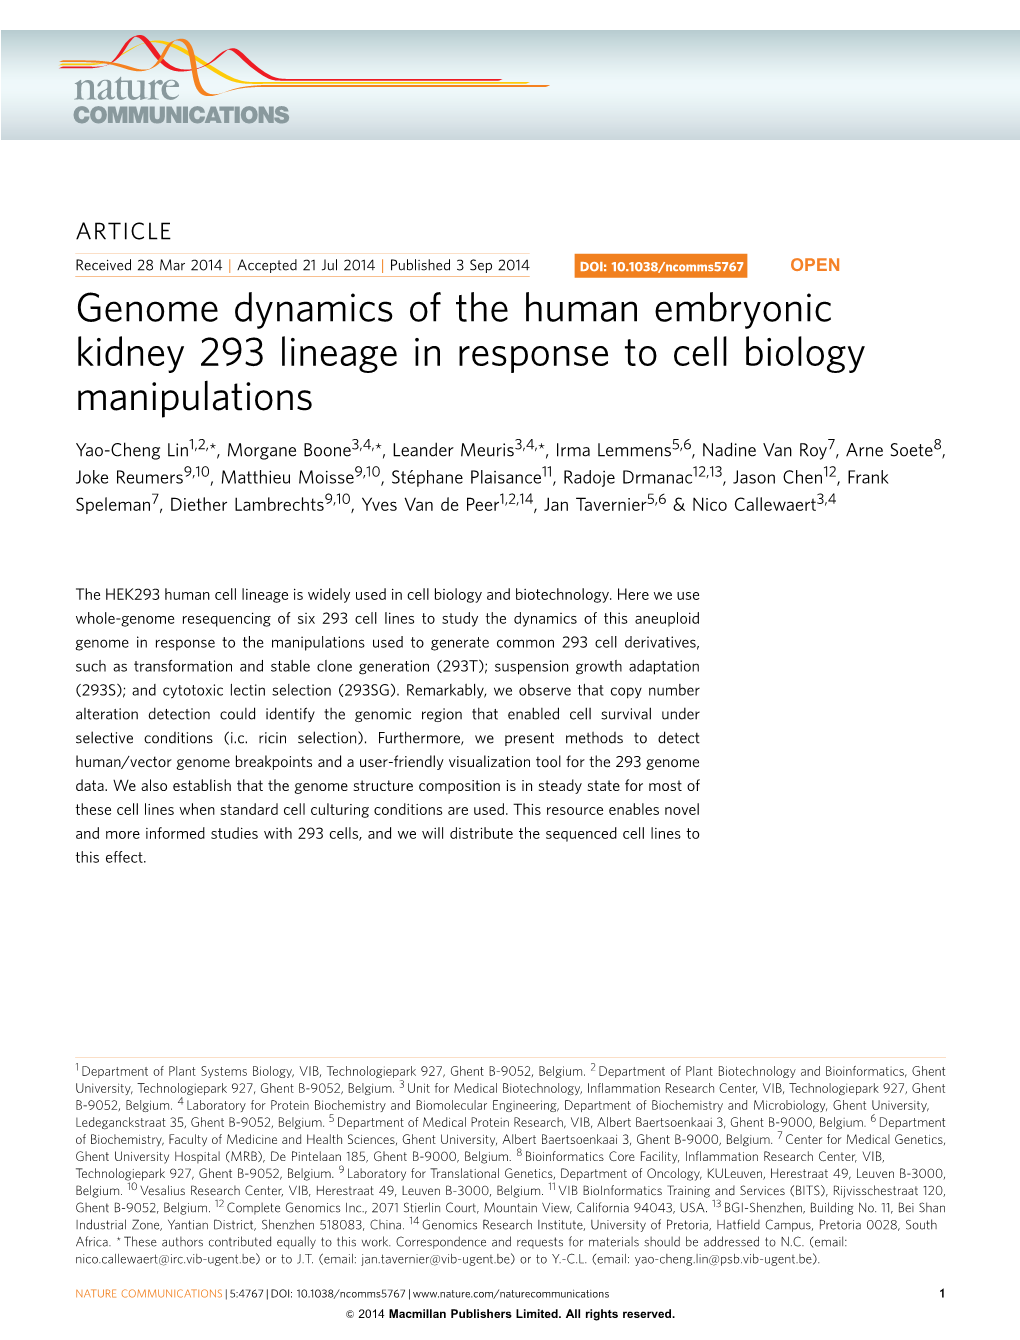 Genome Dynamics of the Human Embryonic Kidney 293 Lineage in Response to Cell Biology Manipulations